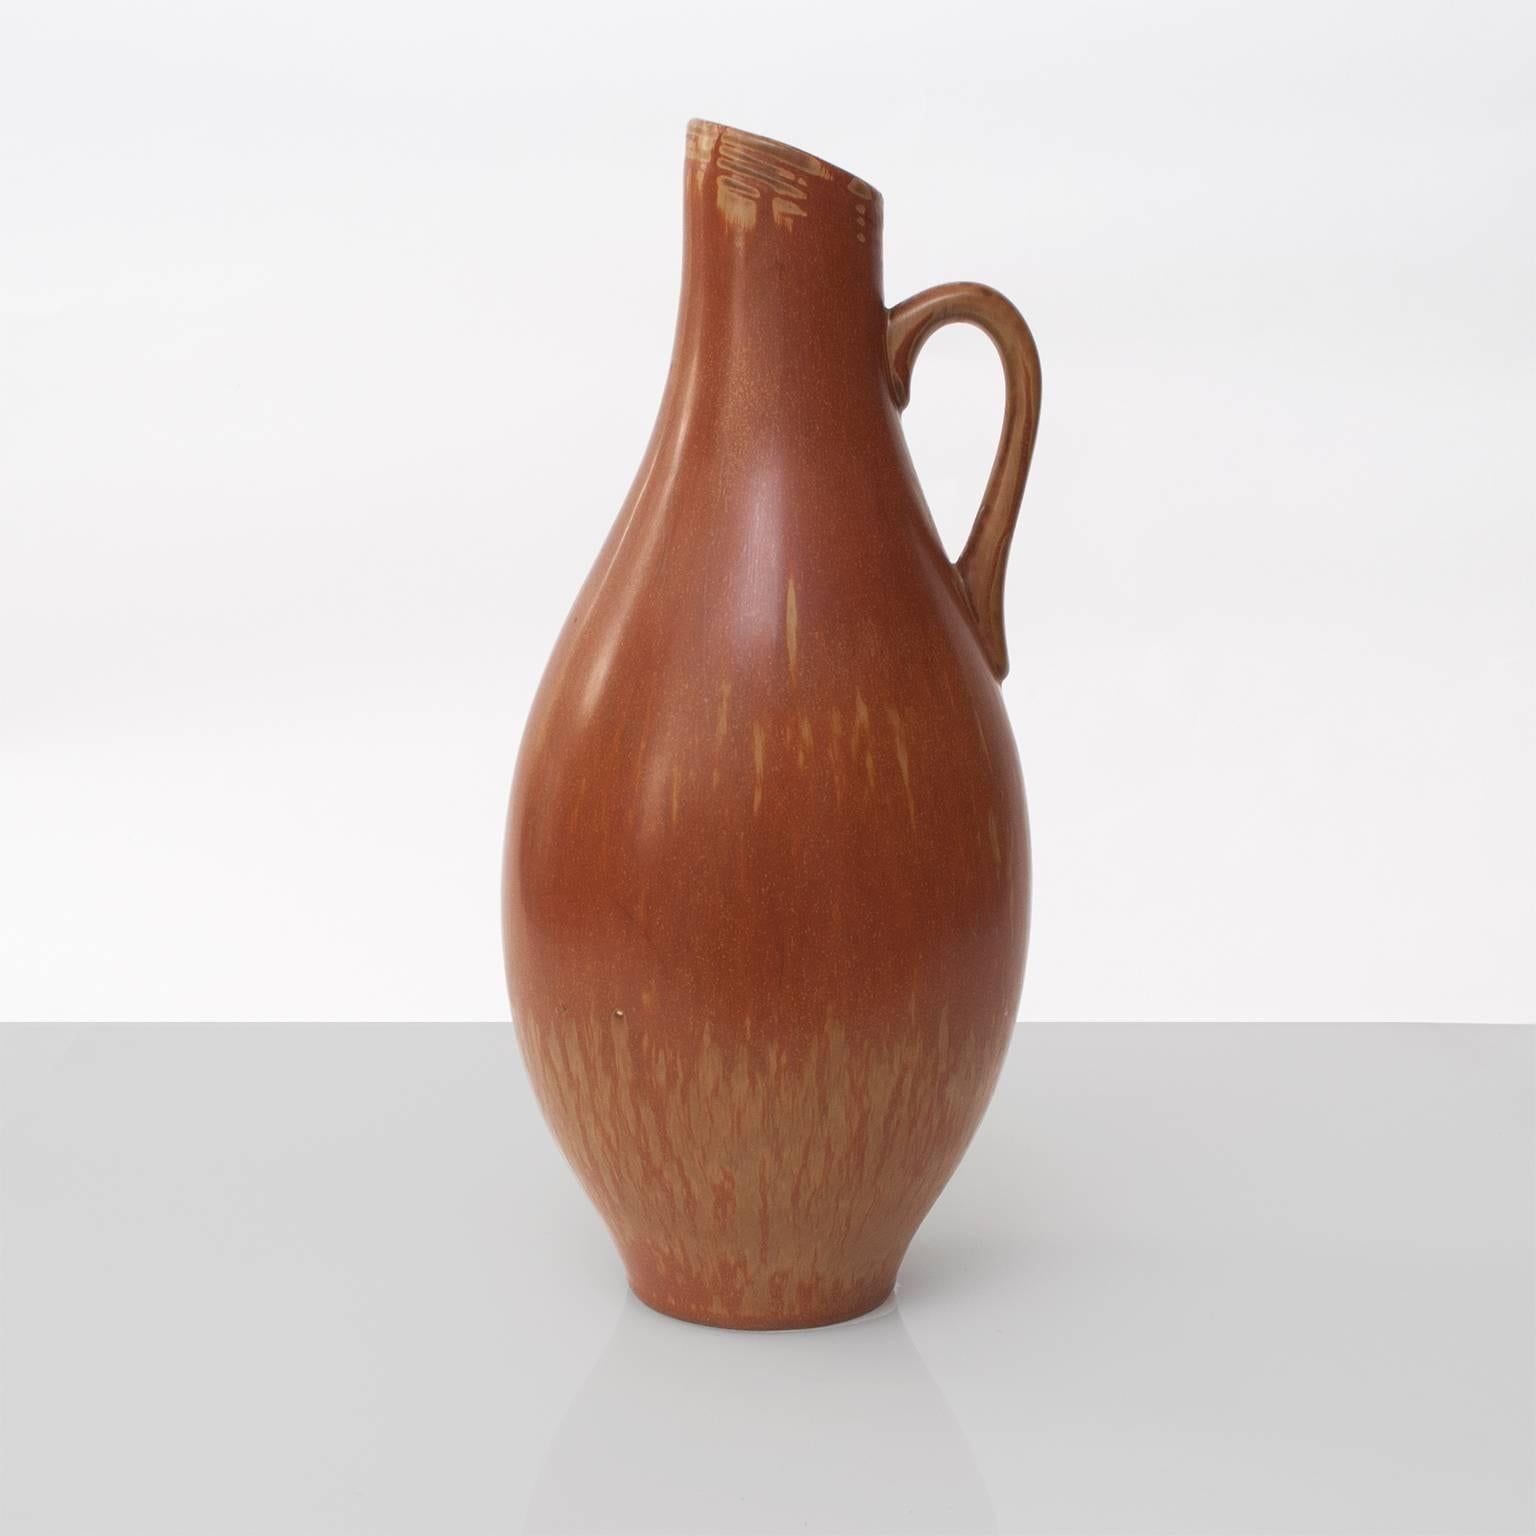 A large Scandinavian modern ceramic pitcher vase with hare's fur glaze. Designed by Gunnar Nylund for Rorstrand circa 1950.
Height: 14.25